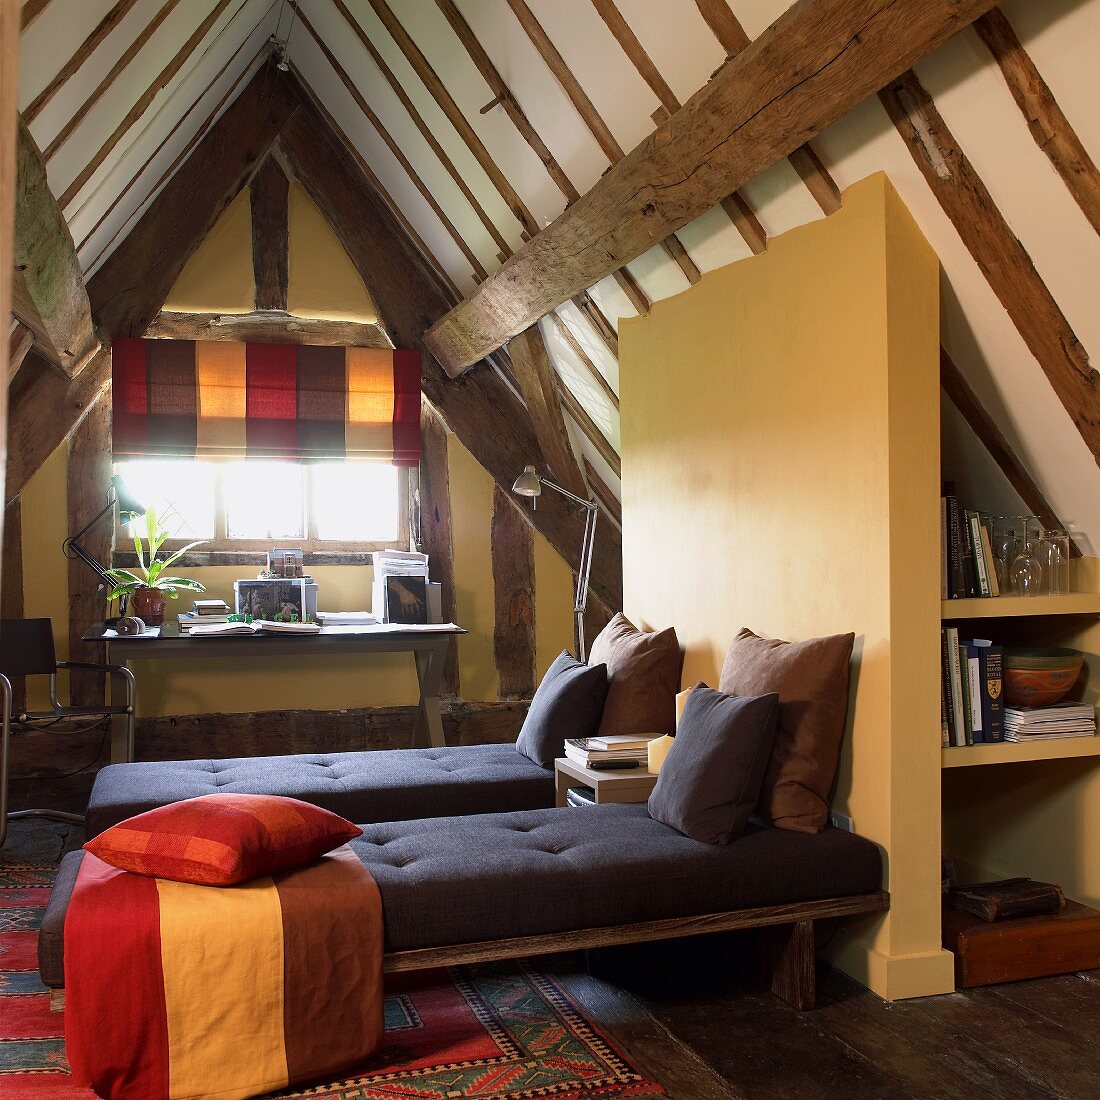 Modern bedroom with practical fittings under rustic roof structure in half-timbered house